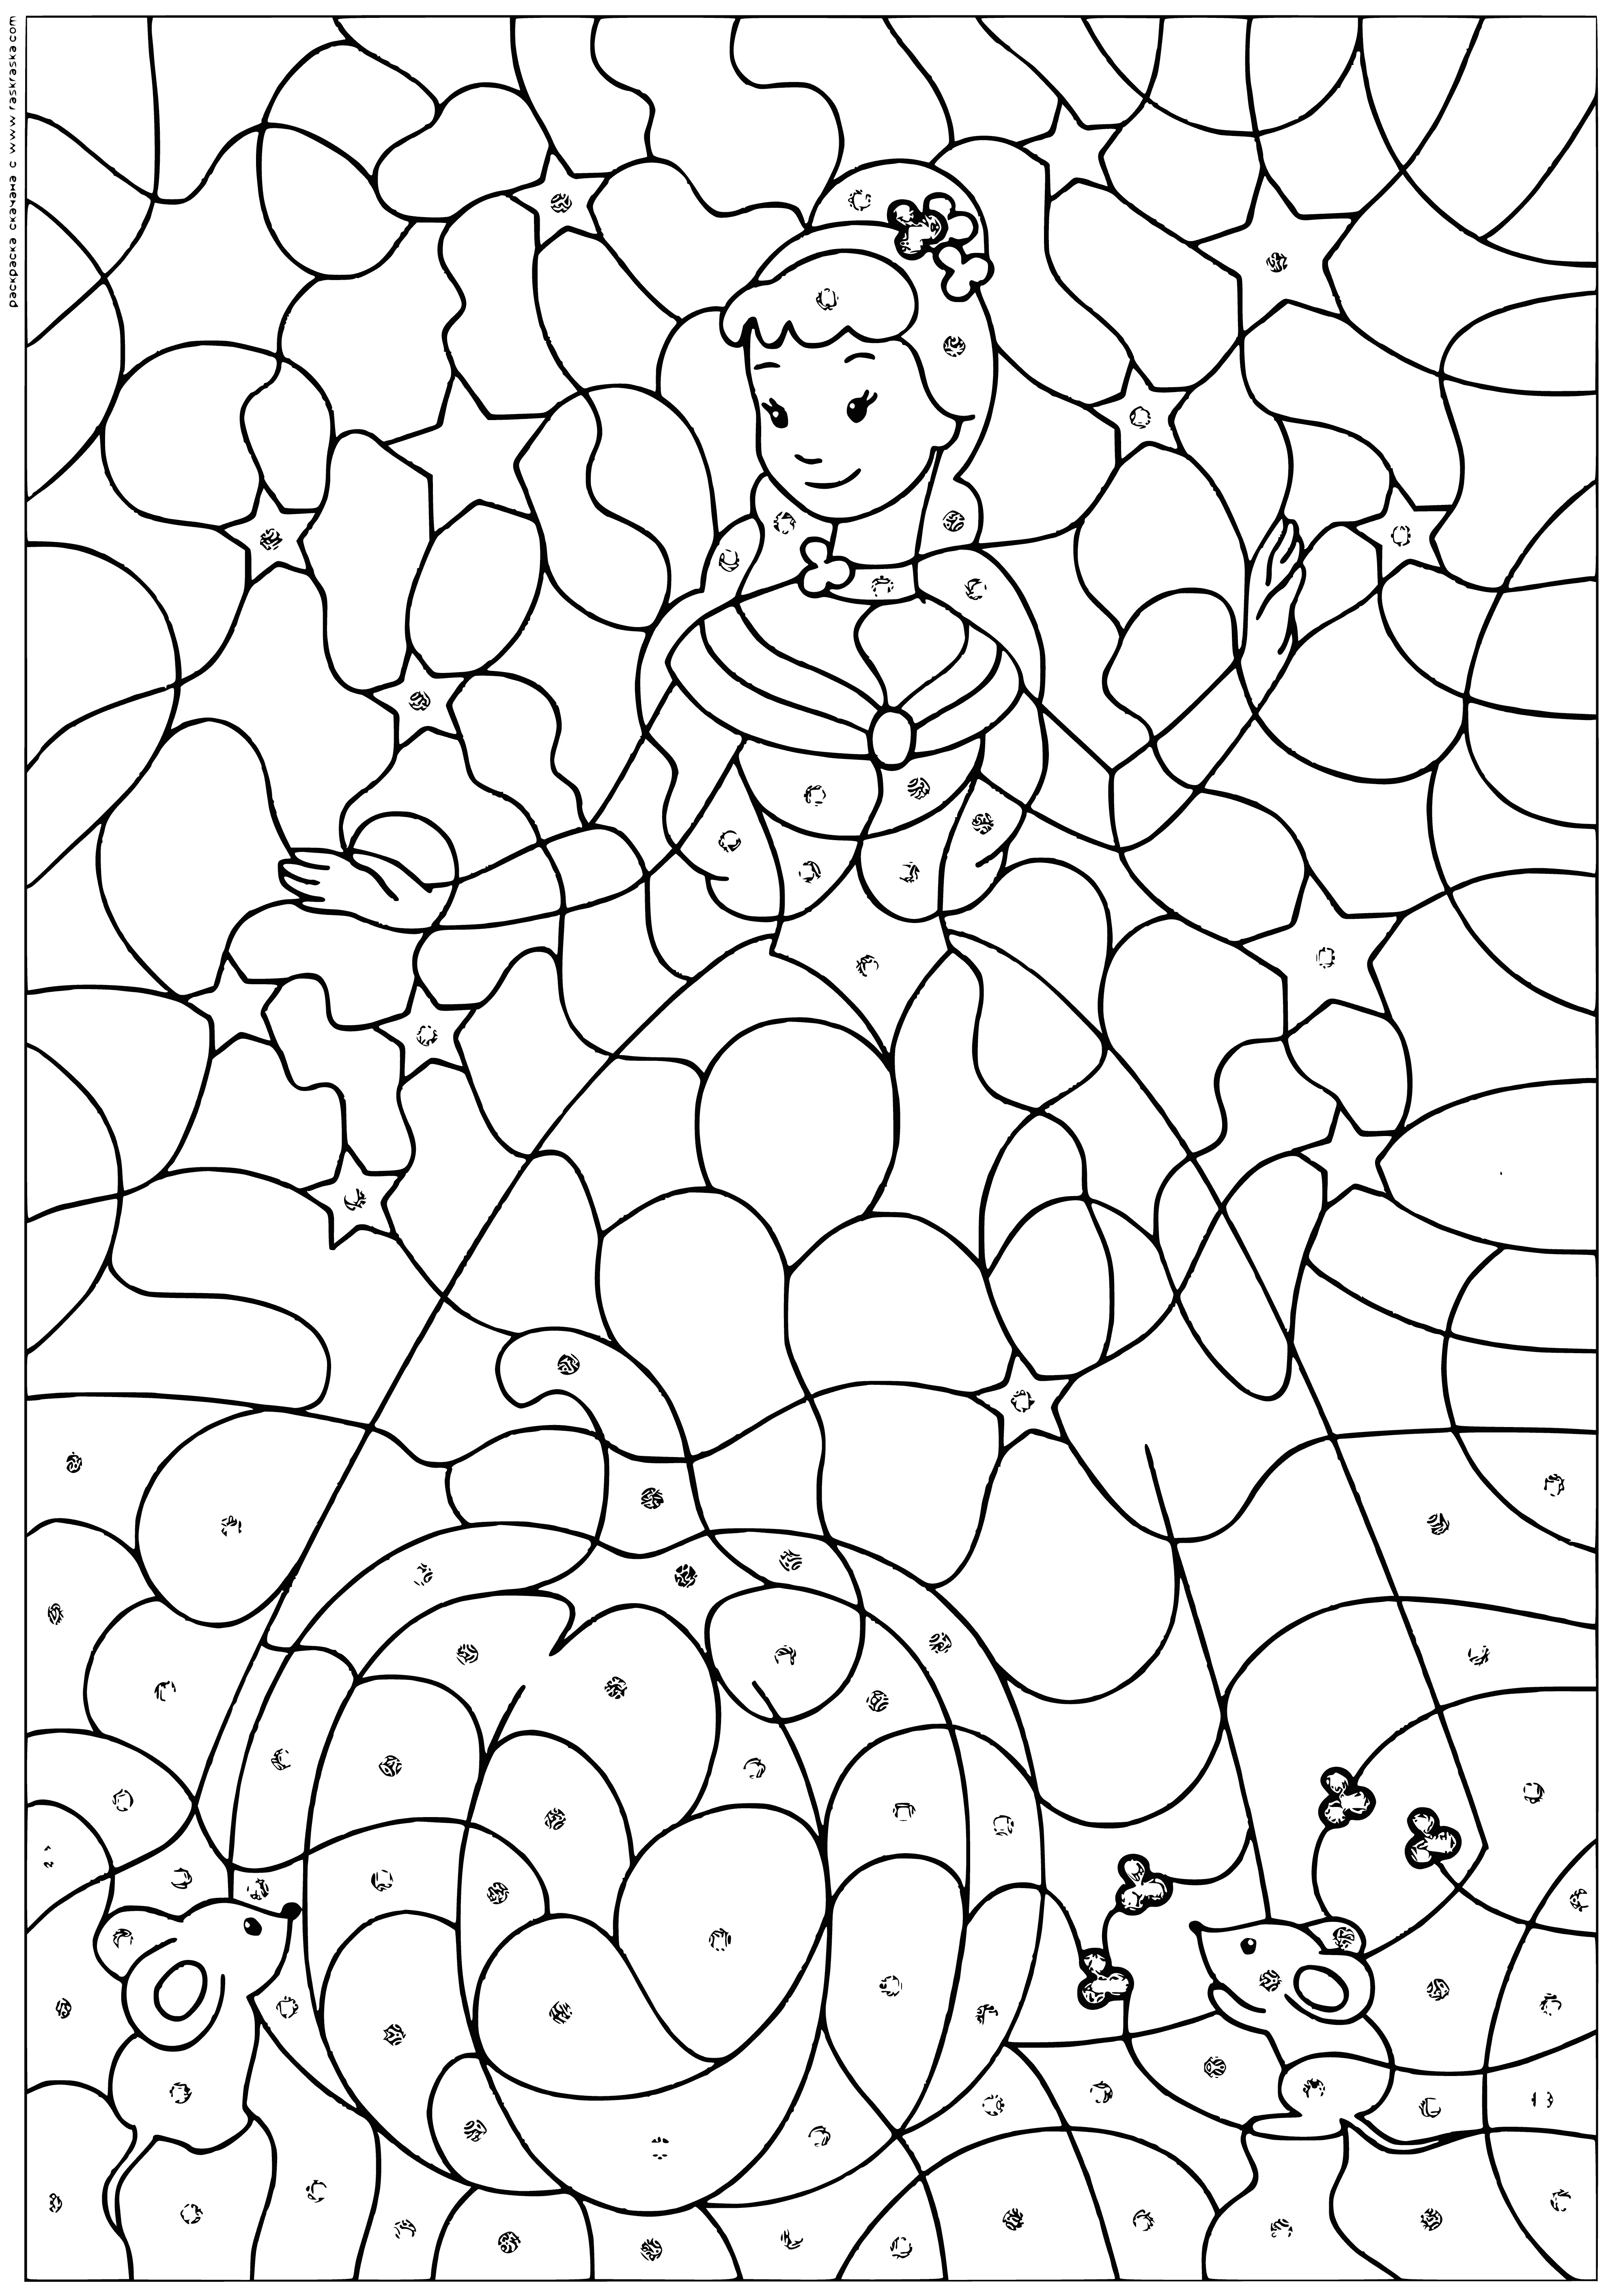 coloring page: Cinderella and prince hold hands in front of castle, she in blue dress and white cape, pumpkin near them.